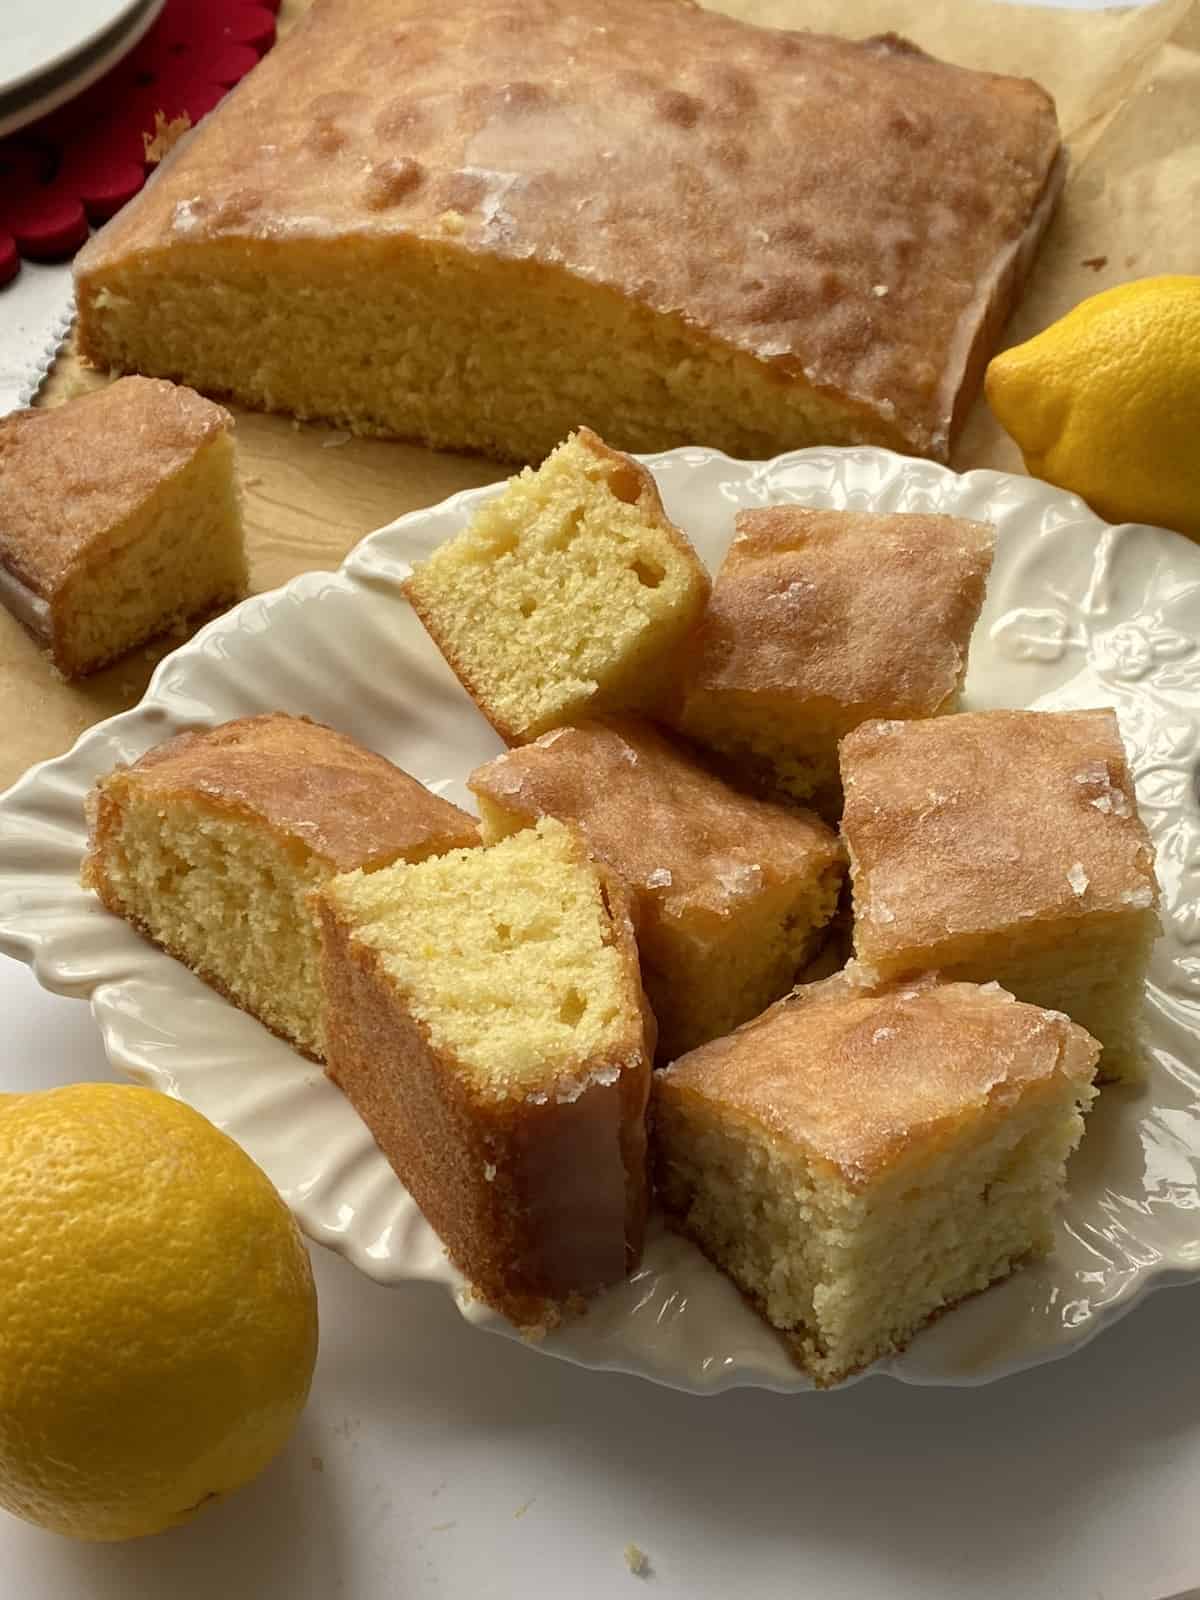 Slices of Lemon Drizzle Traybake on a white plate.